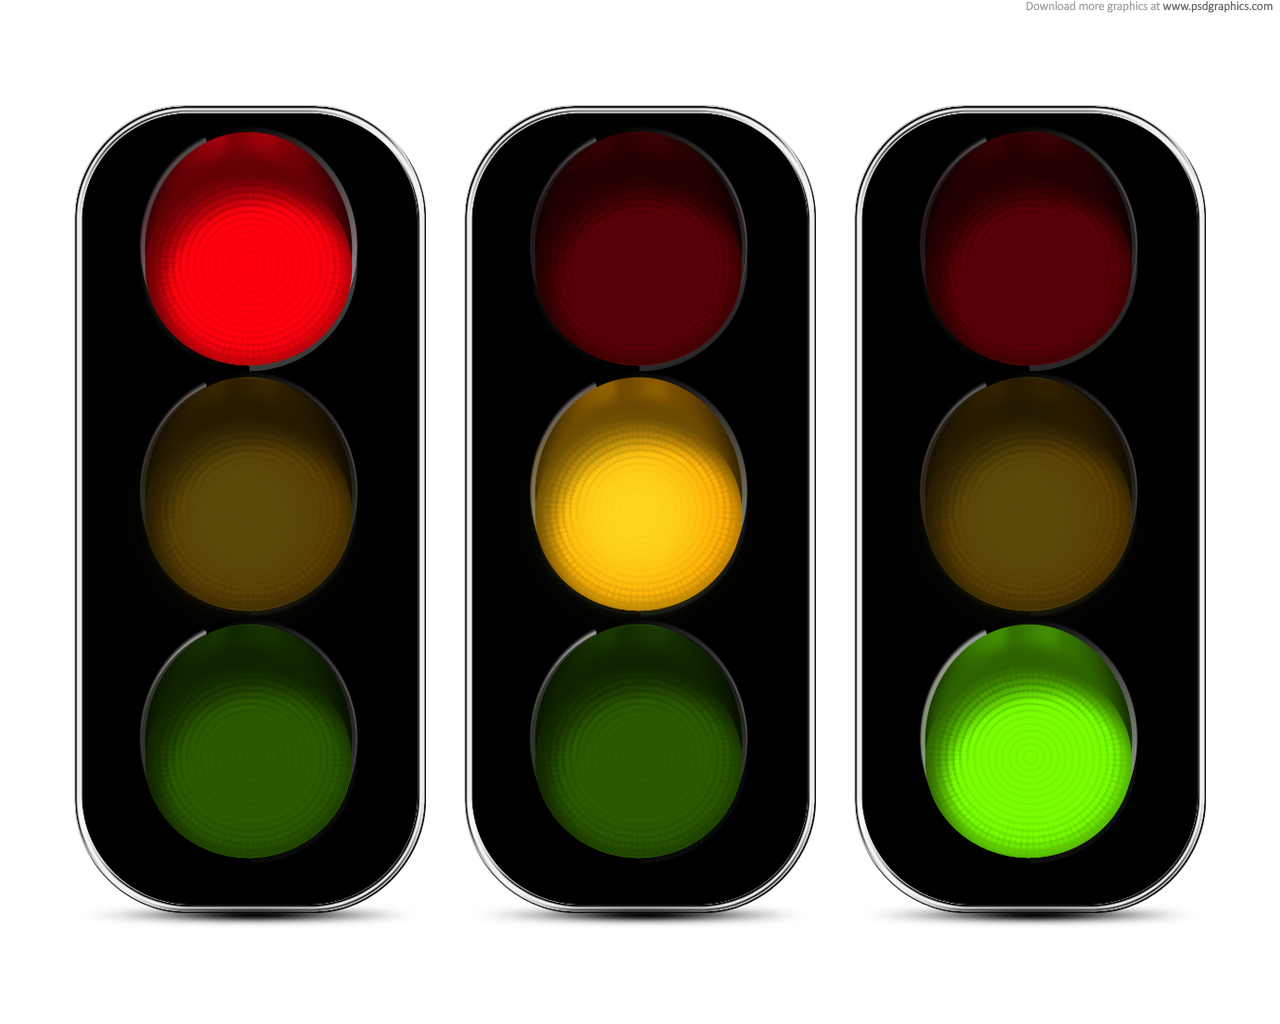 Traffic Stop And Go Lights – Free PSD Download | YourSourceIsOpen.